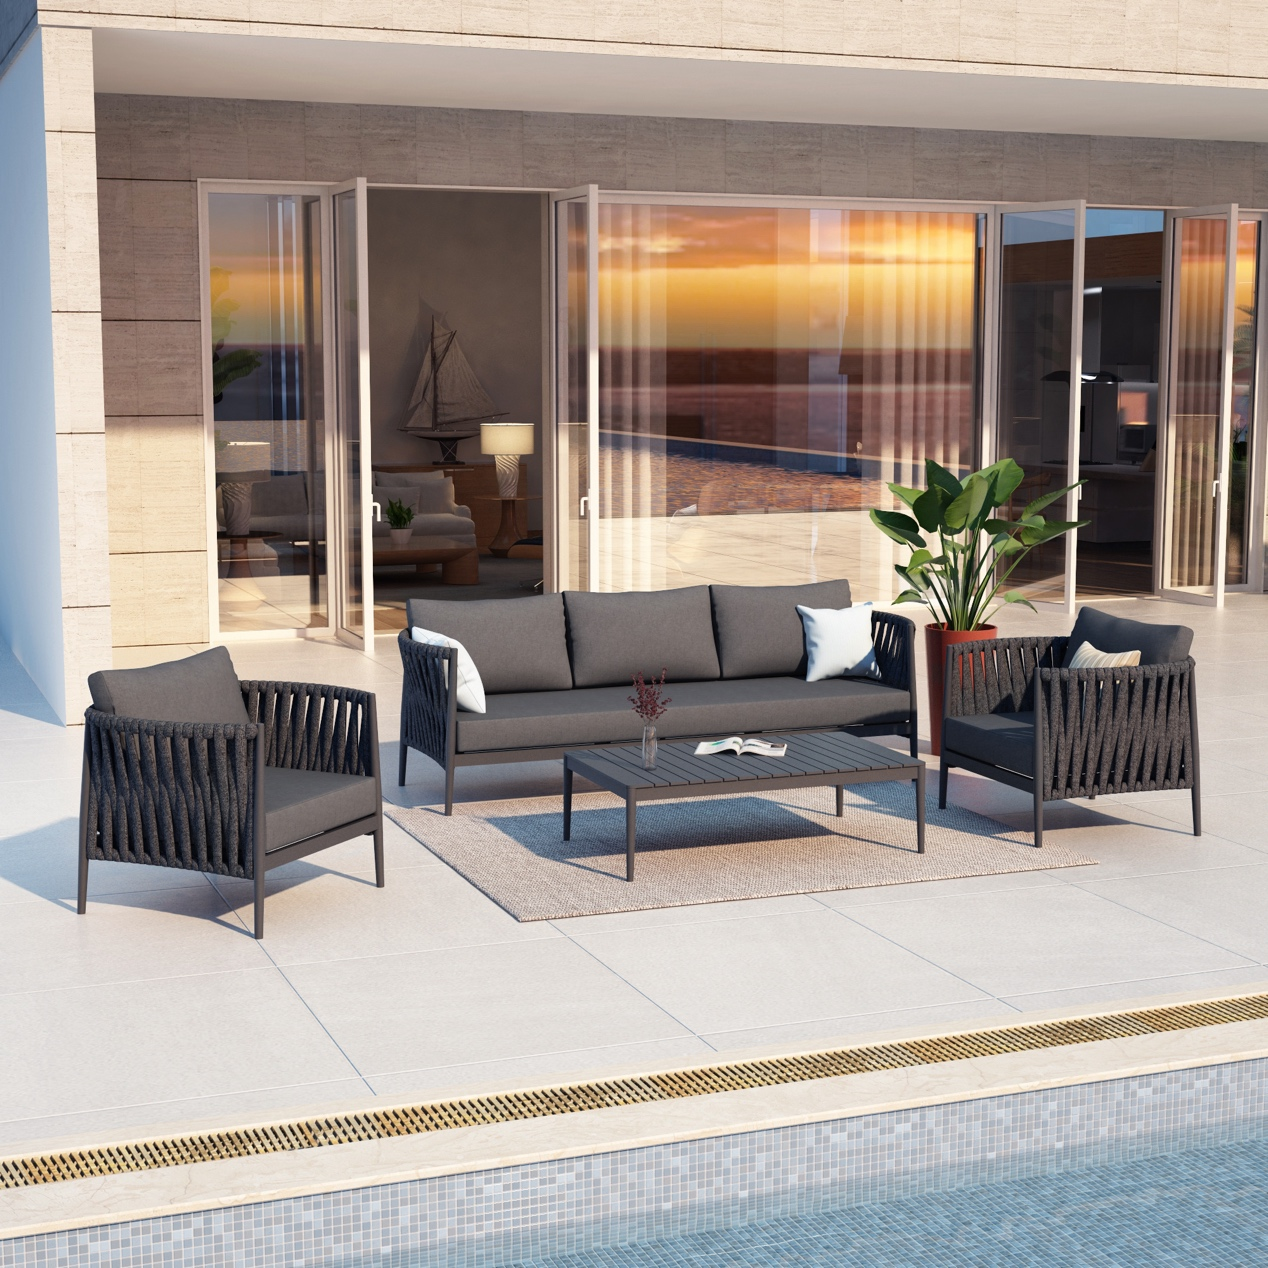 Baeryon Inc. Launches Wicker Patio Sectional Set with Various Configurations.